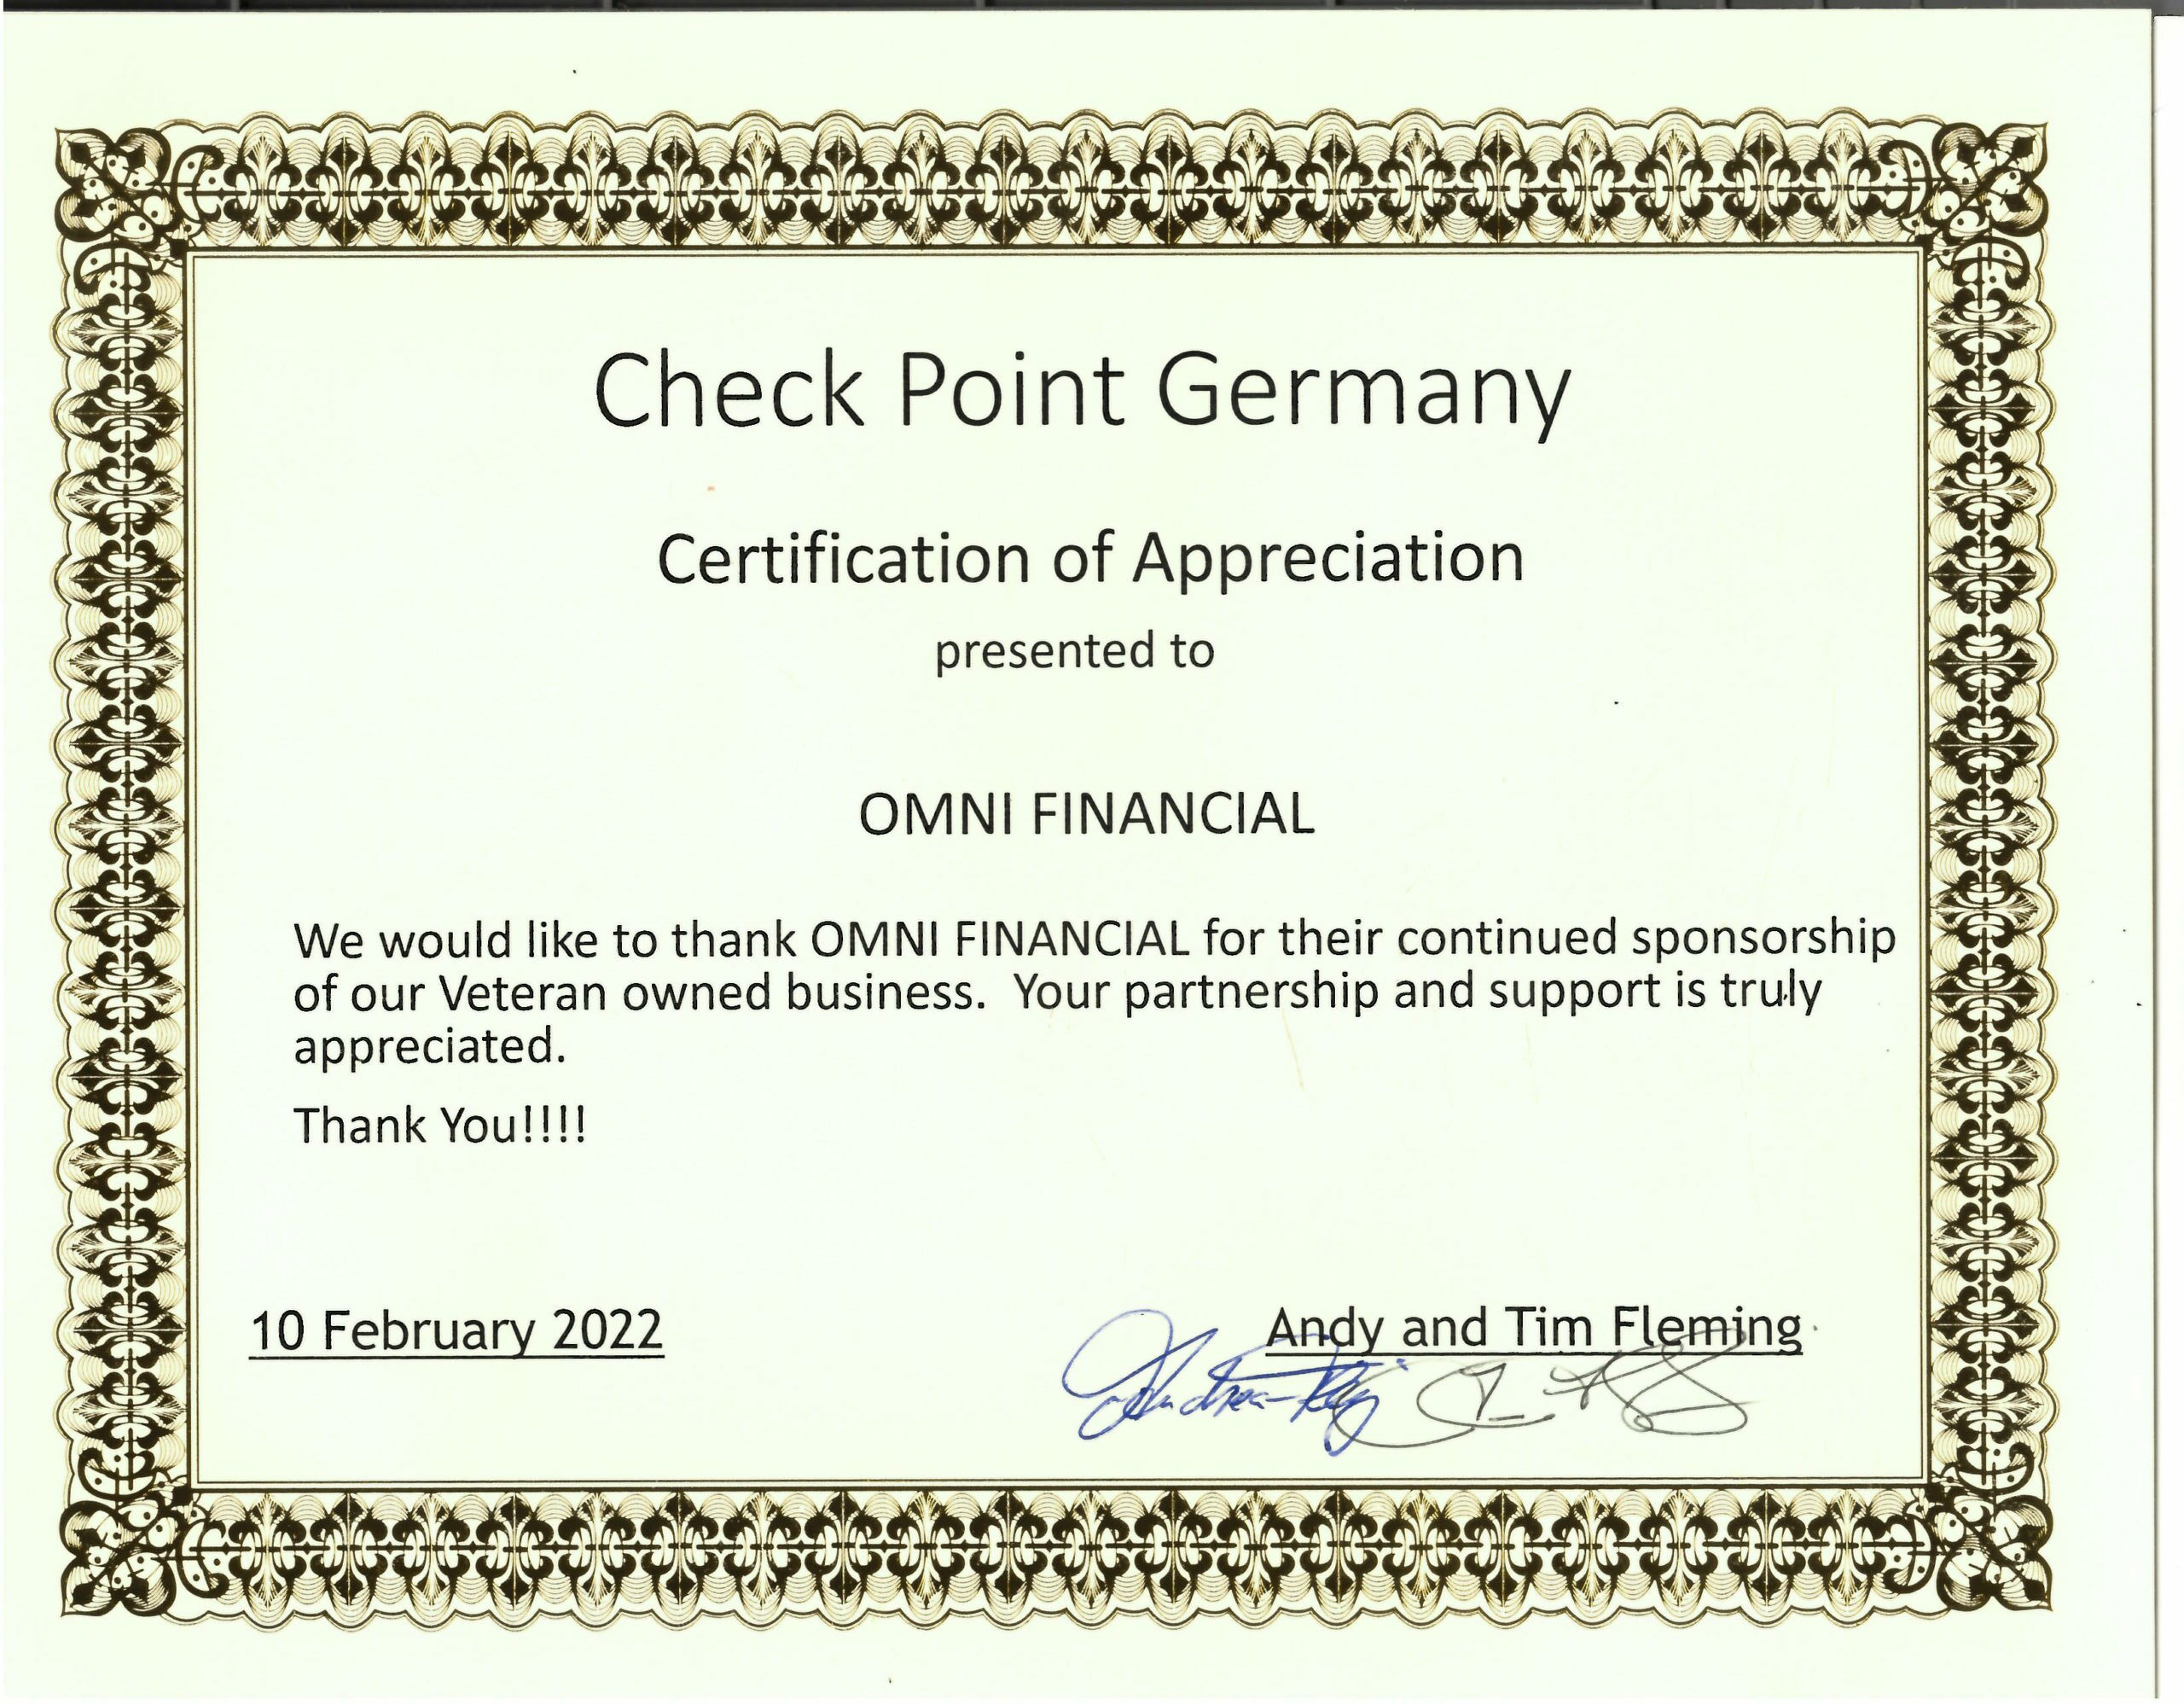 Check Point Germany Certificate of Appreciation